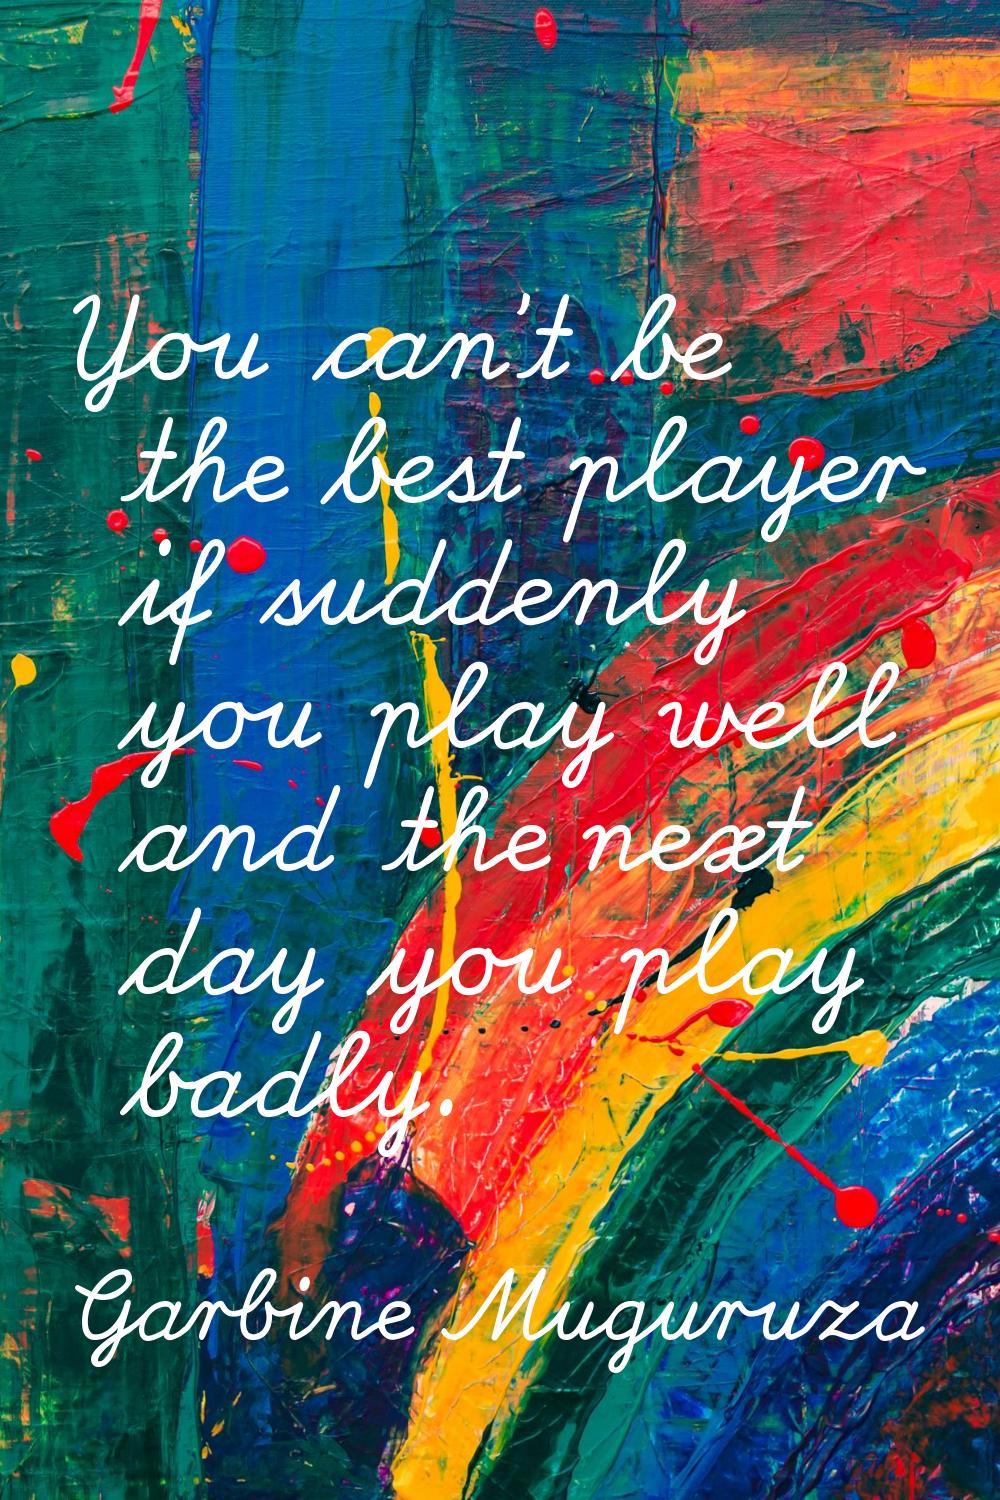 You can't be the best player if suddenly you play well and the next day you play badly.